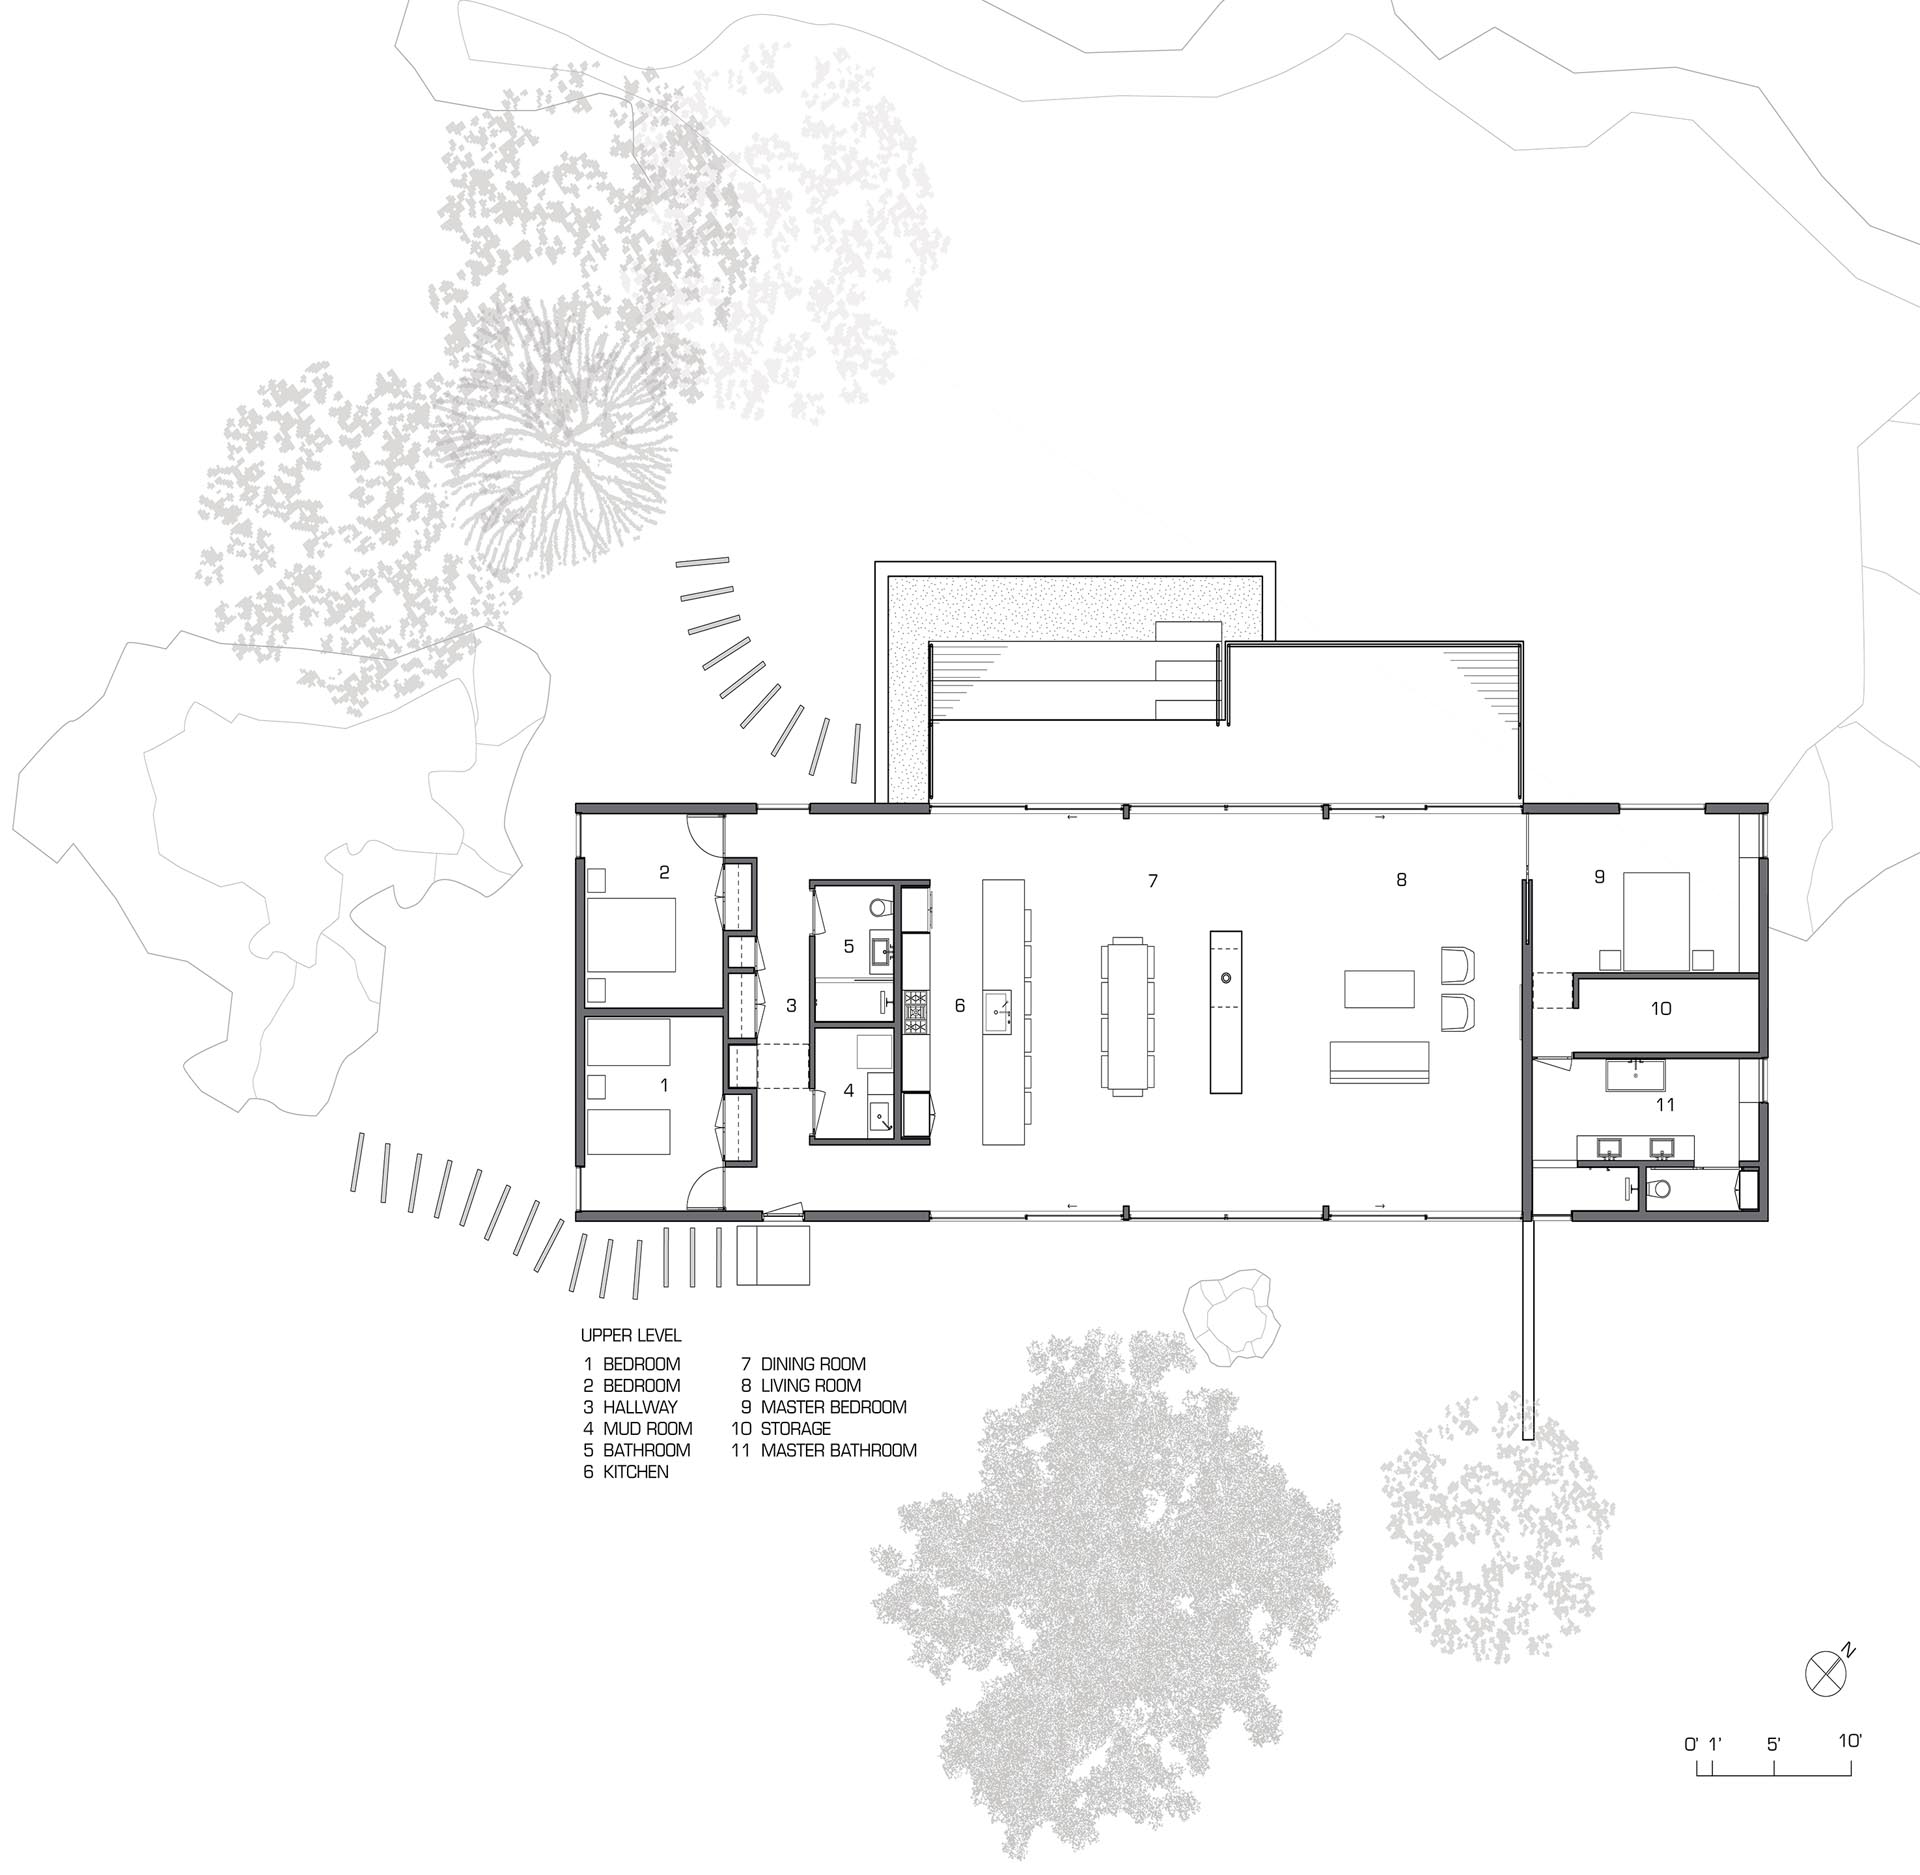 The floor plan for a modern single story house with three bedrooms.